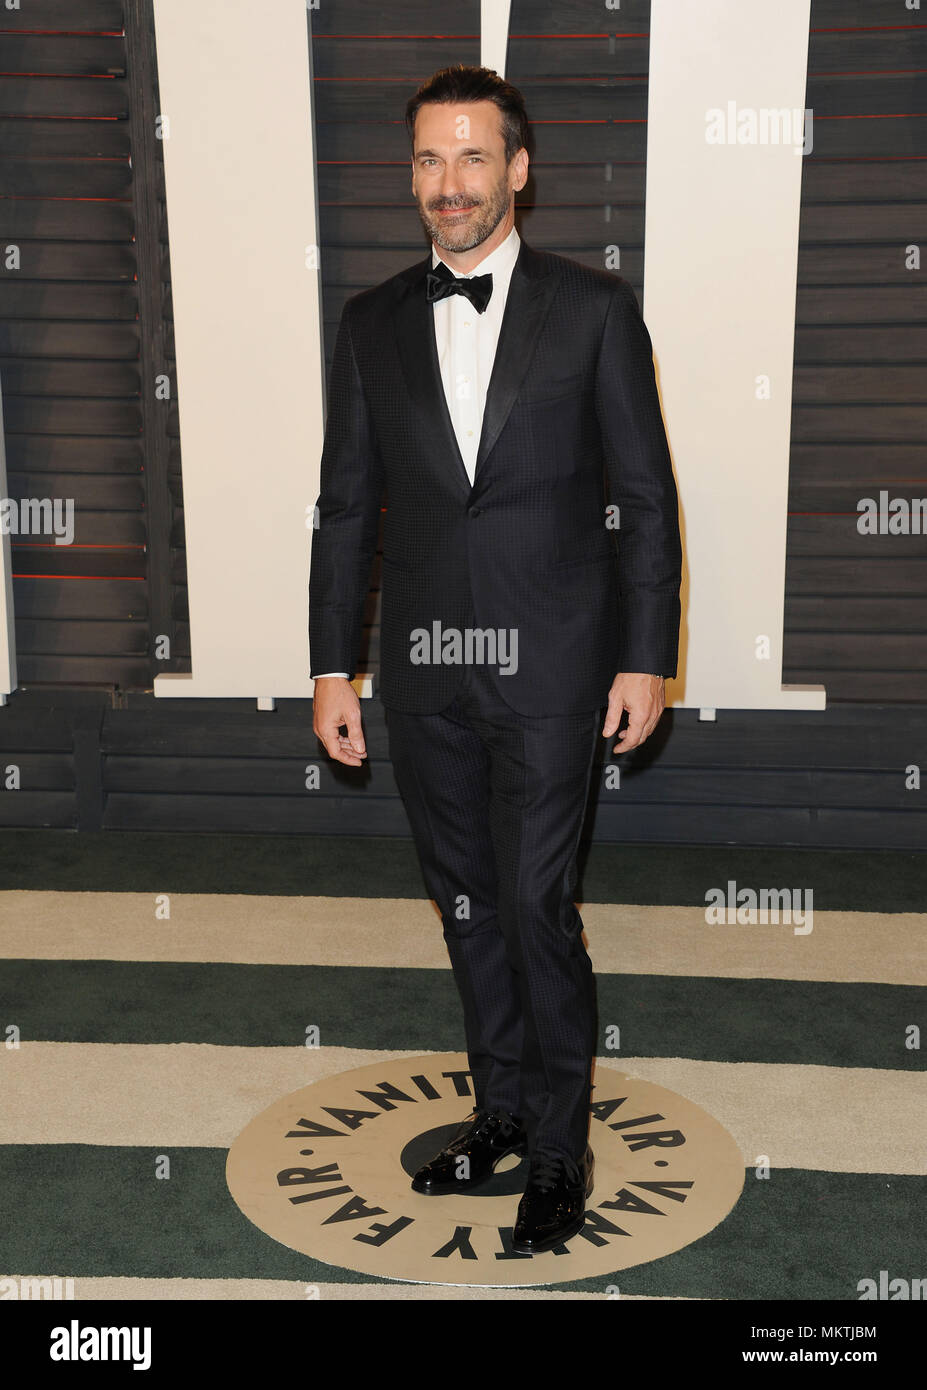 Jon Hamm 299 arriving at the Vanity Fair's Oscar Party 2016 at the Playhouse in Los Angeles. February 28, 2016. -------- Jon Hamm 299  --------- Event in Hollywood Life - California,  Red Carpet Event, Vertical, USA, Film Industry, Celebrities,  Photography, Bestof, Arts Culture and Entertainment, Topix Celebrities fashion /  from the Red Carpet-2016, one person, Vertical, Best of, Hollywood Life, Event in Hollywood Life - California,  Red Carpet and backstage, USA, Film Industry, Celebrities,  movie celebrities, TV celebrities, Music celebrities, Photography, Bestof, Arts Culture and Entertai Stock Photo